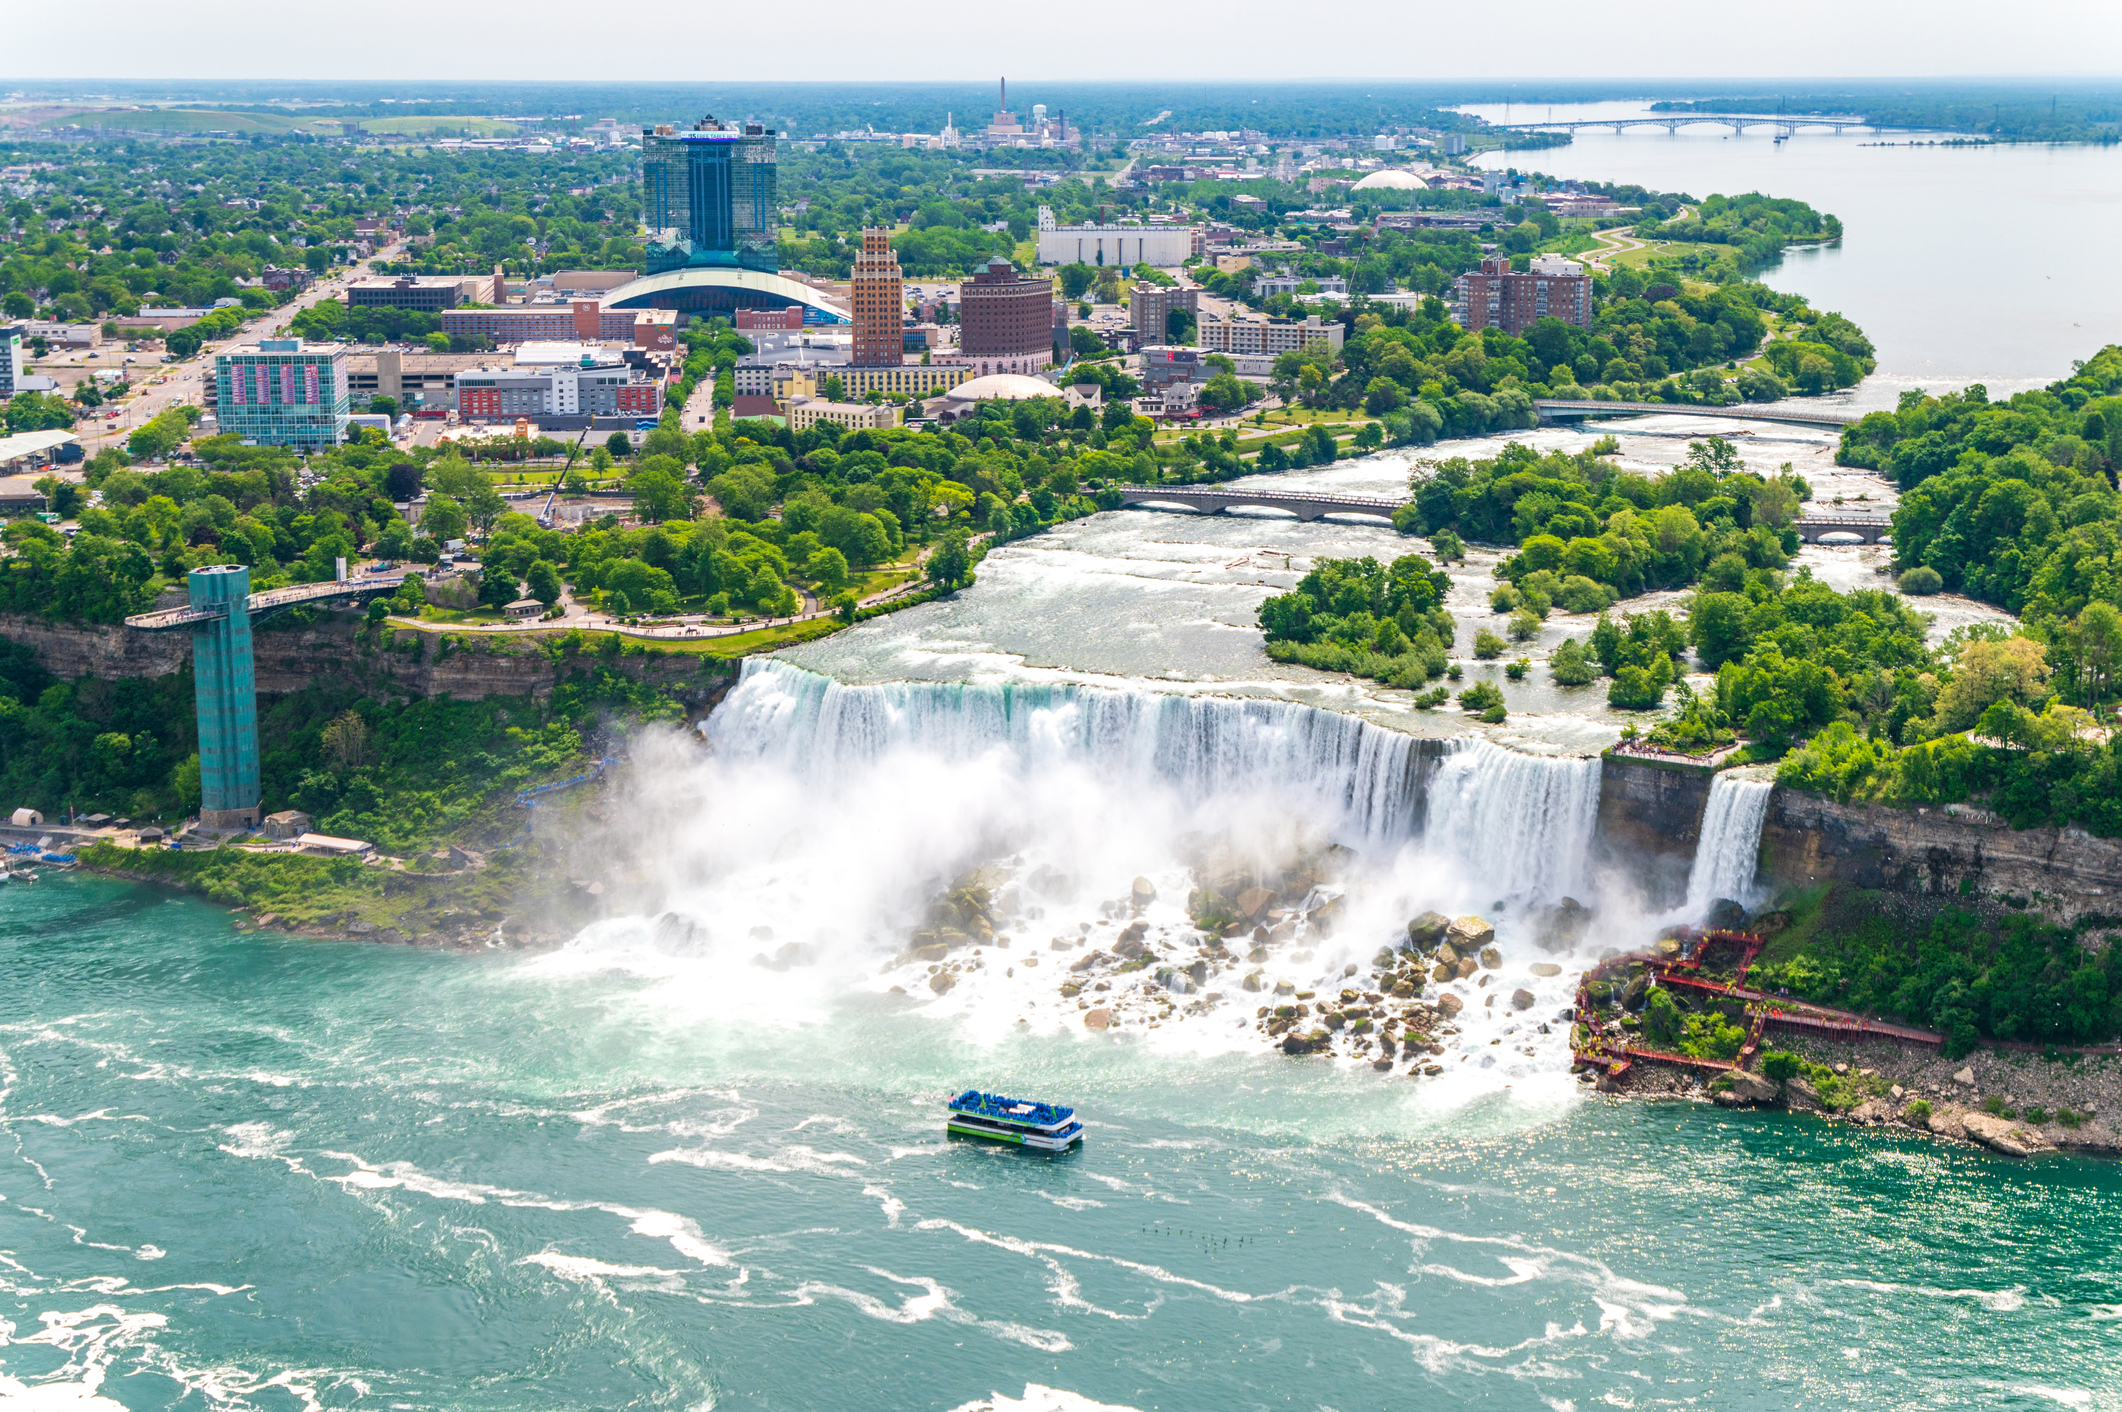 Aerial view of Niagara Falls with a tour boat nearby